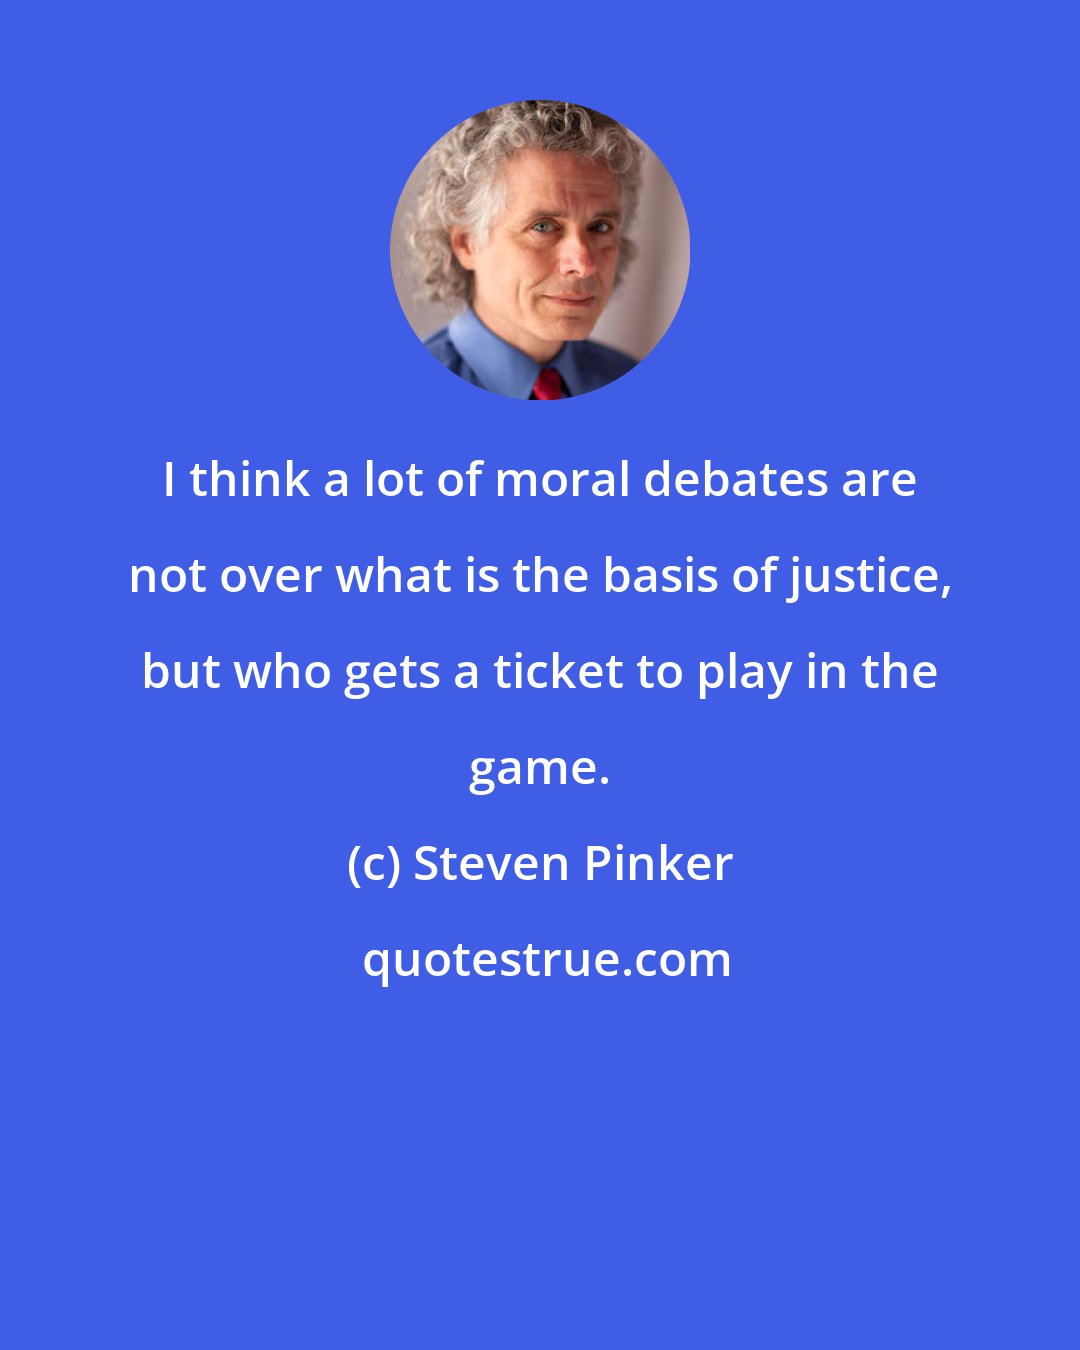 Steven Pinker: I think a lot of moral debates are not over what is the basis of justice, but who gets a ticket to play in the game.